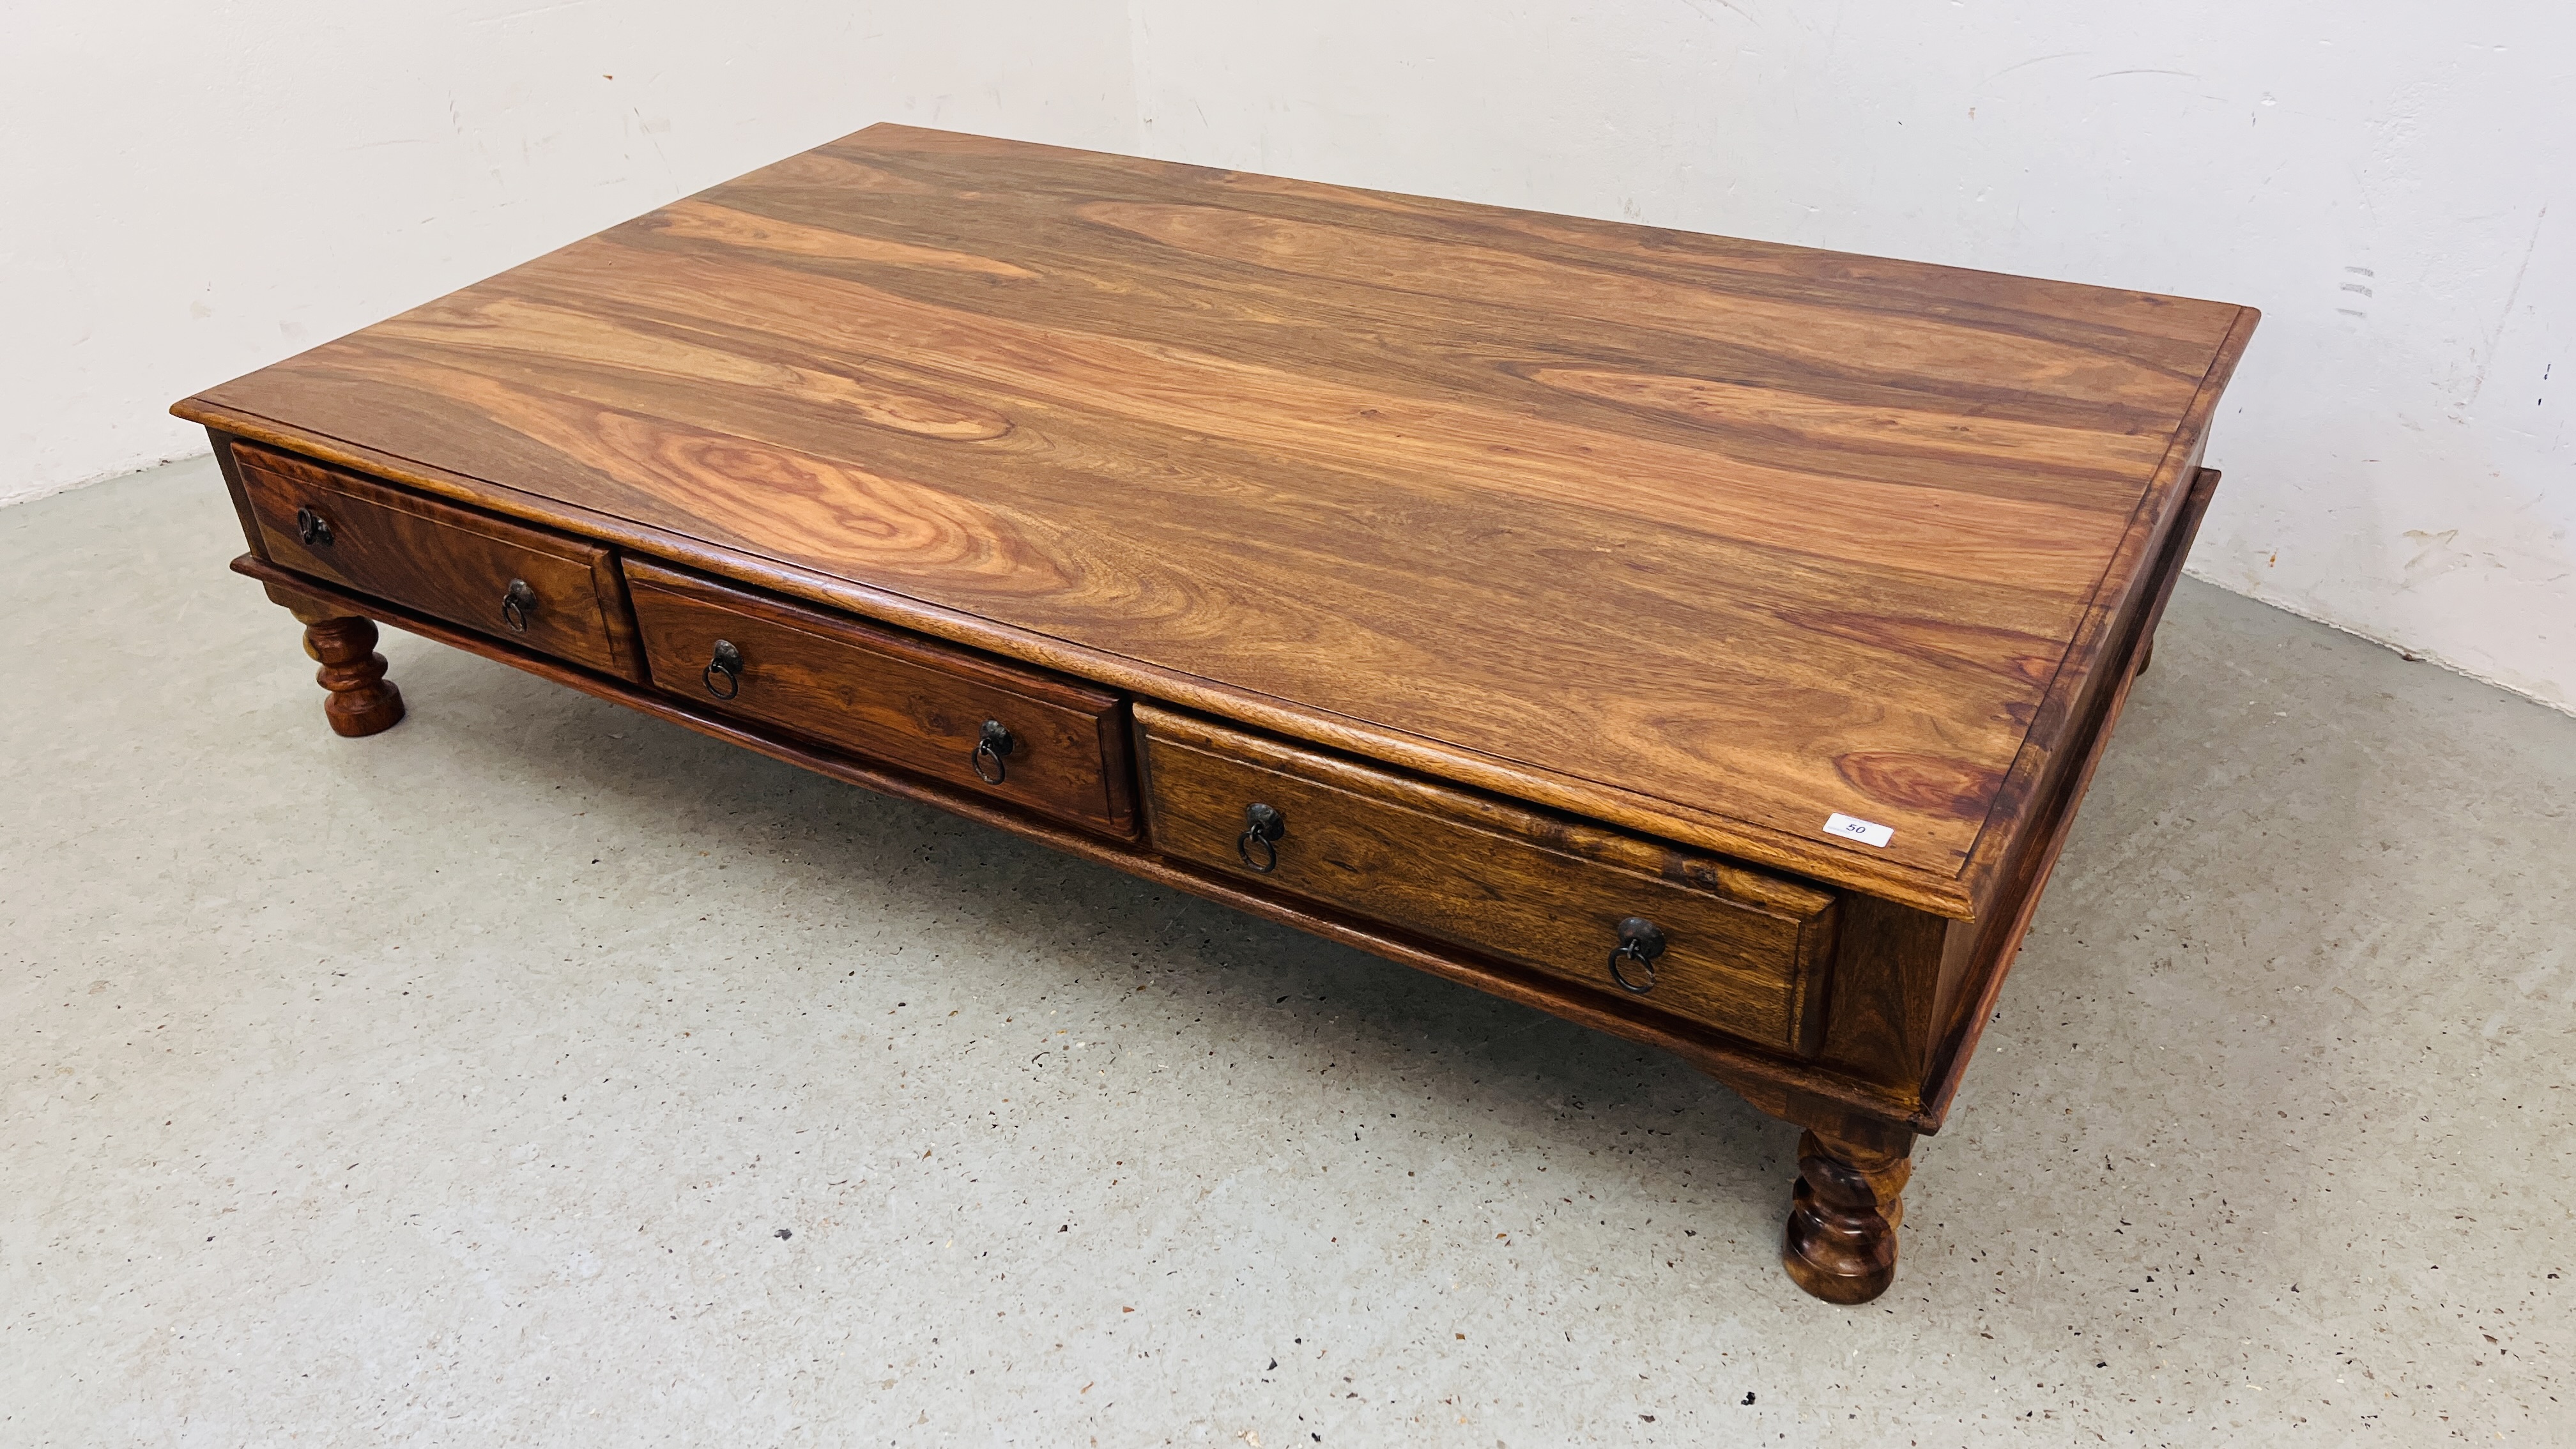 A MODERN ORIENTAL HARDWOOD COFFEE TABLE WITH FRIEZE DRAWERS 181CM. LONG.